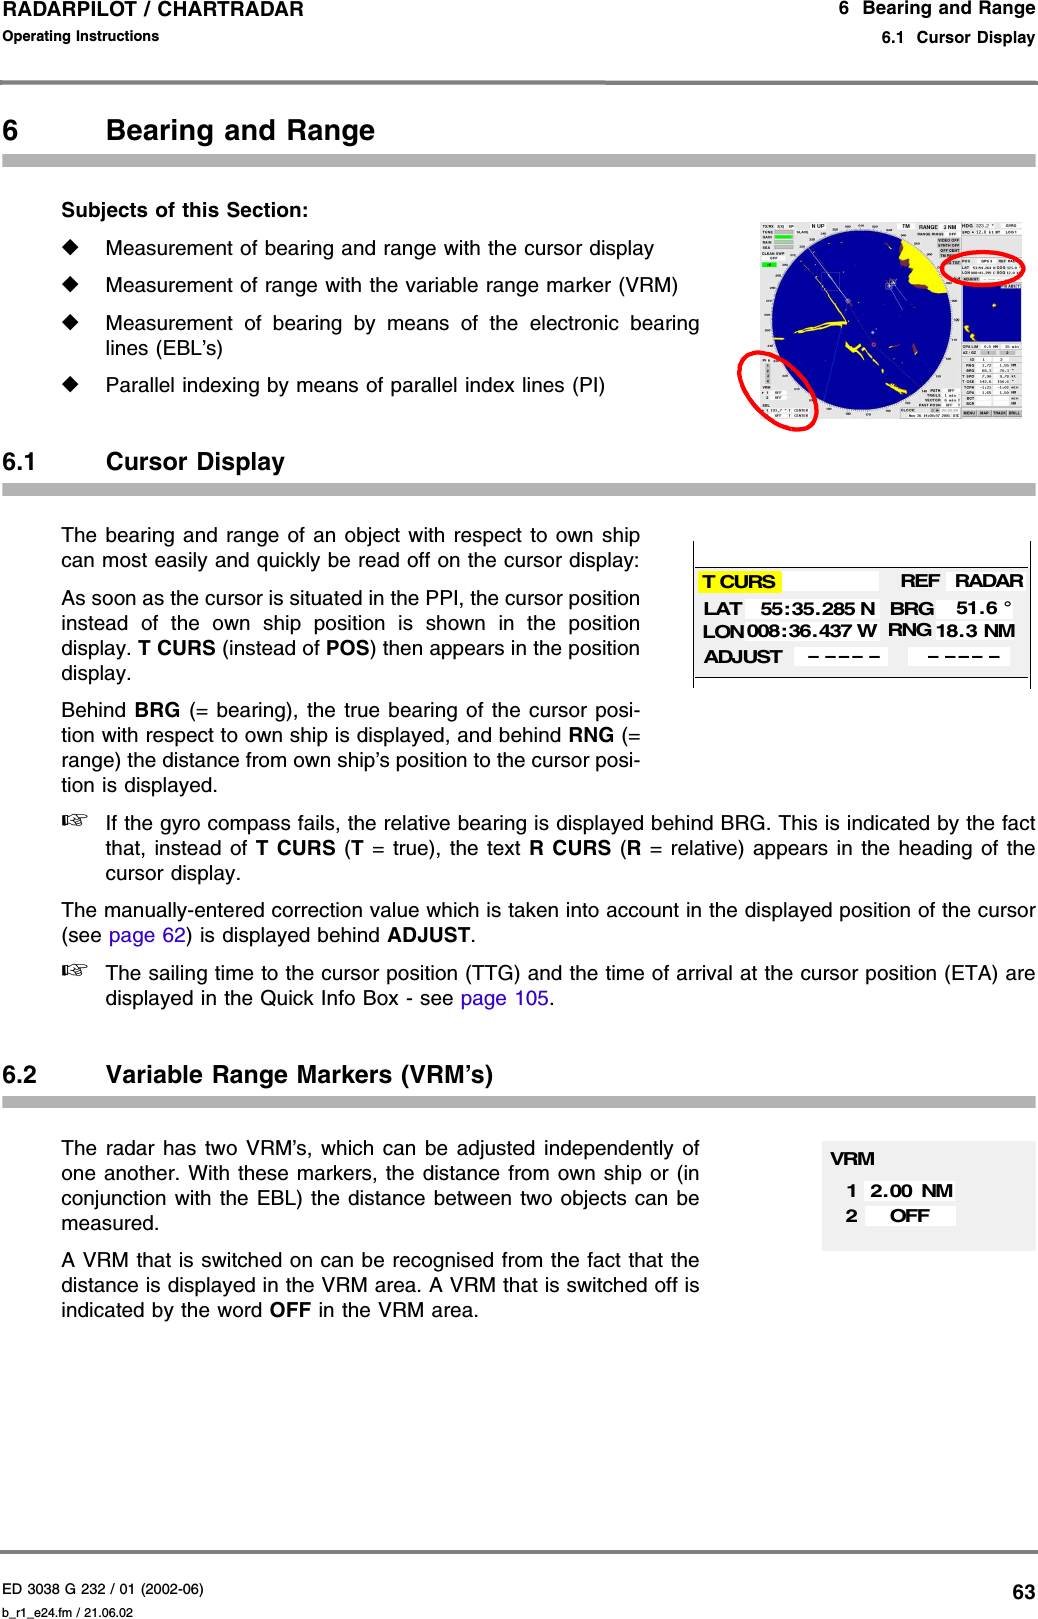 ED 3038 G 232 / 01 (2002-06) Operating Instructions6  Bearing and Range6.1  Cursor Displayb_r1_e24.fm / 21.06.0263RADARPILOT / CHARTRADAR 6 Bearing and RangeSubjects of this Section: ◆Measurement of bearing and range with the cursor display◆Measurement of range with the variable range marker (VRM)◆Measurement of bearing by means of the electronic bearinglines (EBL’s)◆Parallel indexing by means of parallel index lines (PI)6.1 Cursor DisplayThe bearing and range of an object with respect to own shipcan most easily and quickly be read off on the cursor display:As soon as the cursor is situated in the PPI, the cursor positioninstead of the own ship position is shown in the positiondisplay. T CURS (instead of POS) then appears in the positiondisplay.Behind  BRG (= bearing), the true bearing of the cursor posi-tion with respect to own ship is displayed, and behind RNG (=range) the distance from own ship’s position to the cursor posi-tion is displayed.☞If the gyro compass fails, the relative bearing is displayed behind BRG. This is indicated by the factthat, instead of T CURS (T = true), the text R CURS (R = relative) appears in the heading of thecursor display.The manually-entered correction value which is taken into account in the displayed position of the cursor(see page 62) is displayed behind ADJUST.☞The sailing time to the cursor position (TTG) and the time of arrival at the cursor position (ETA) aredisplayed in the Quick Info Box - see page 105.6.2 Variable Range Markers (VRM’s)The radar has two VRM’s, which can be adjusted independently ofone another. With these markers, the distance from own ship or (inconjunction with the EBL) the distance between two objects can bemeasured.A VRM that is switched on can be recognised from the fact that thedistance is displayed in the VRM area. A VRM that is switched off isindicated by the word OFF in the VRM area.LATLONBRGRNG55:35. 285 N008:36. 437 W51.6 °18.3 NMADJUST–– – –– –– – ––REFRADART CURSVRM2OFF12.00 NM